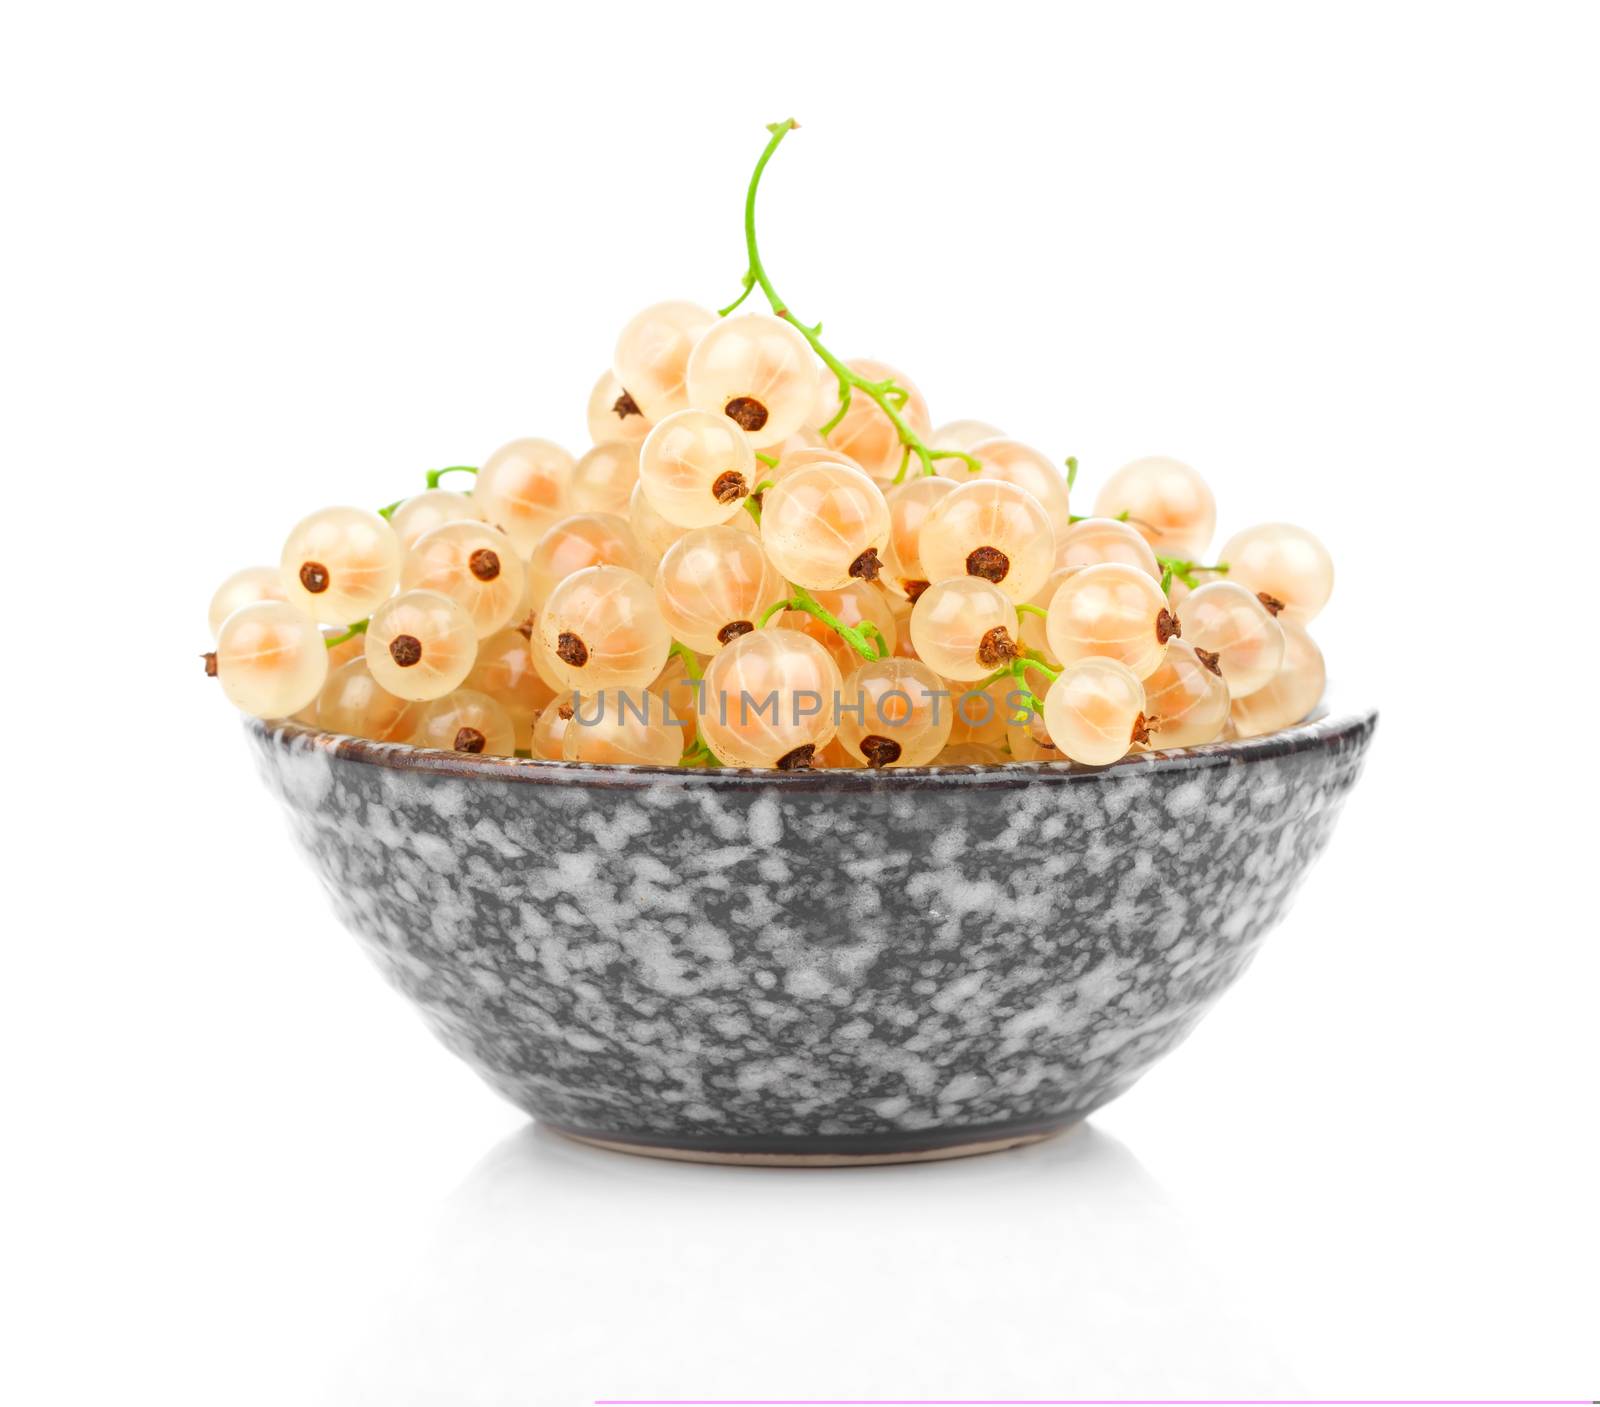 white currant in a bowl, on a white background